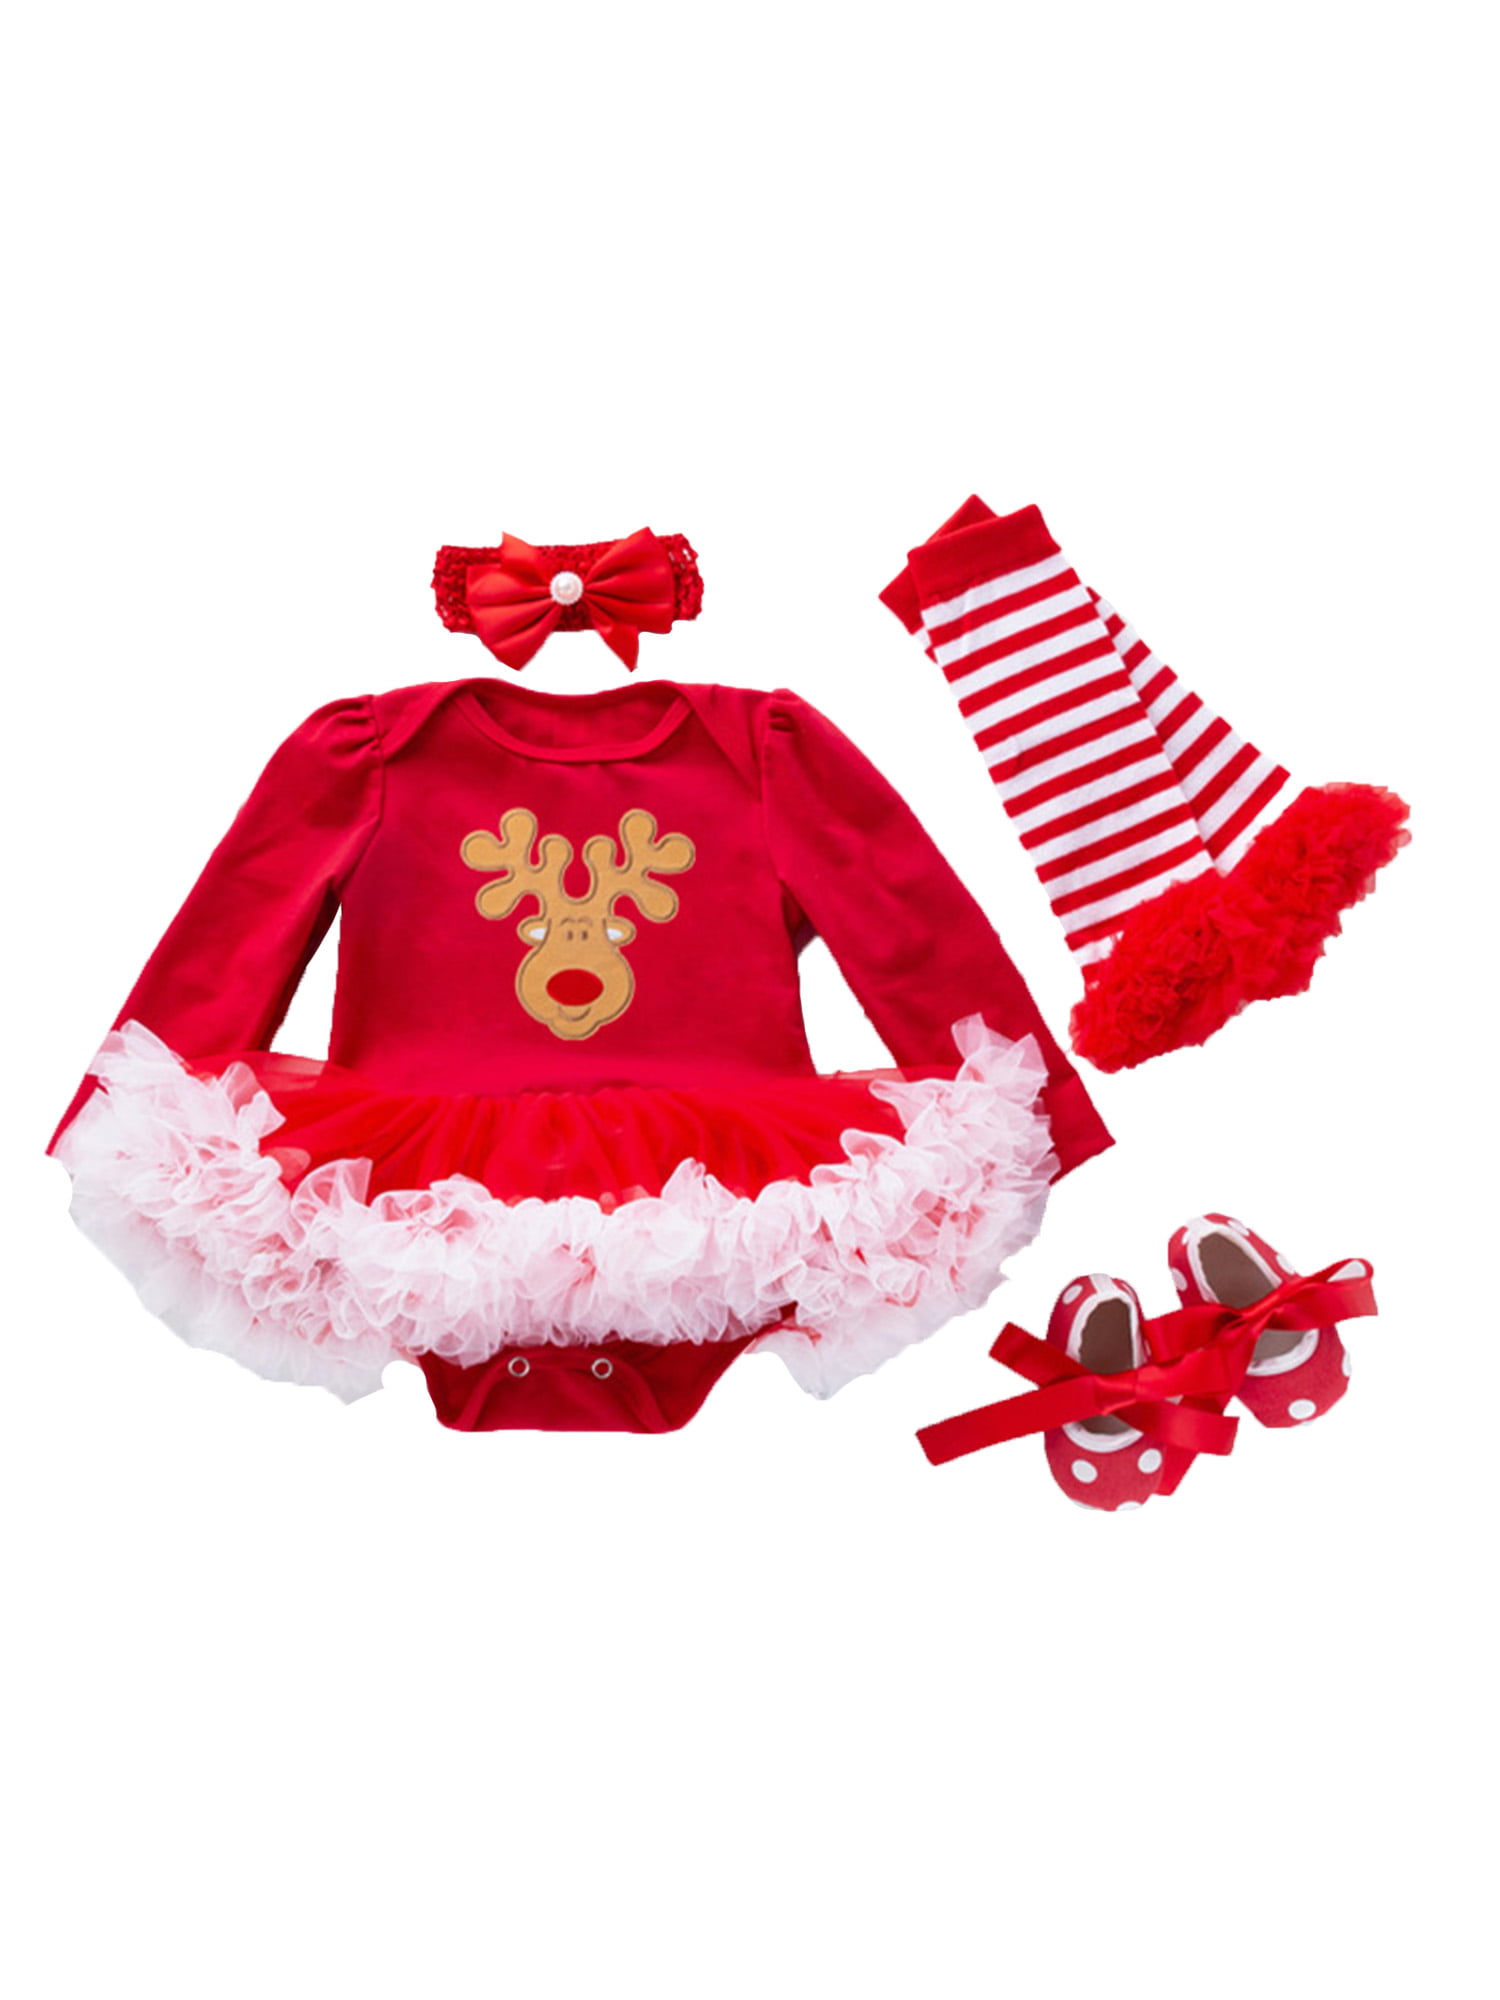 Newborn Infant Baby Christmas Clothes Outfit Xmas Cloak Romper Tops Pants Sets 